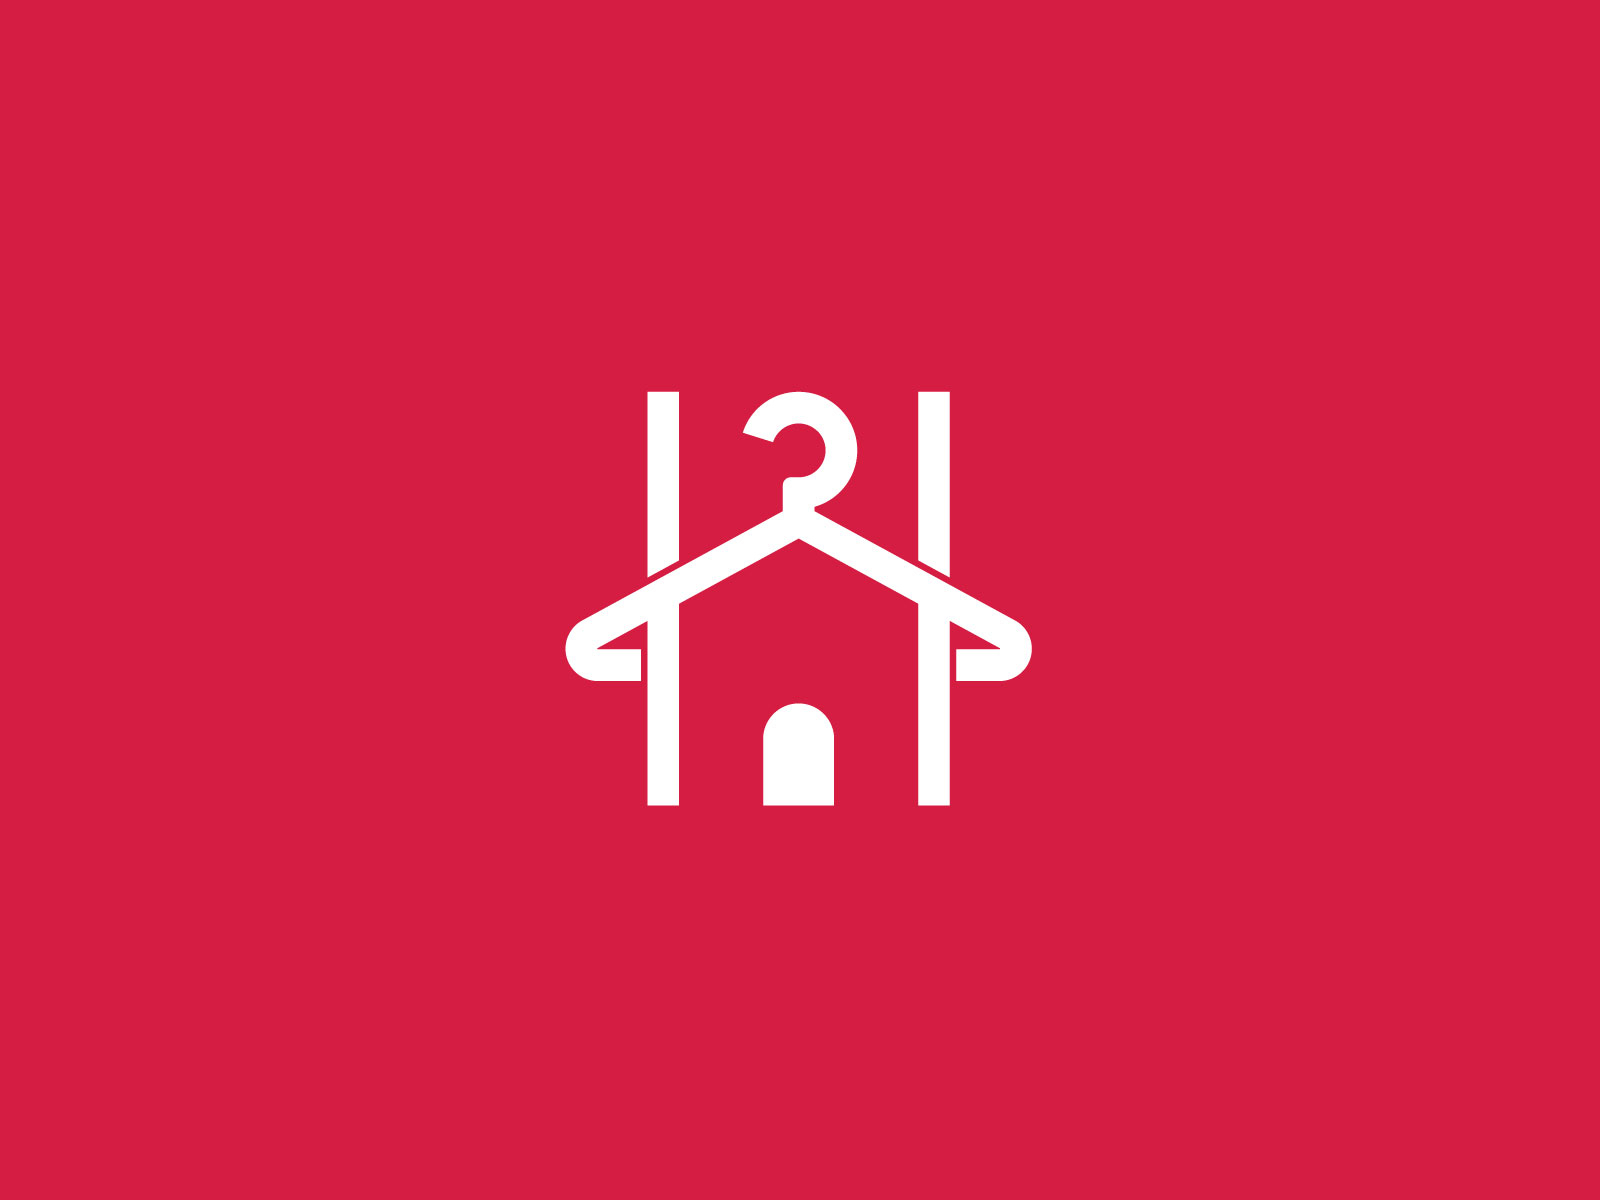 Letter H For Home Clothes Logo Design by Sixtynine Designs on Dribbble